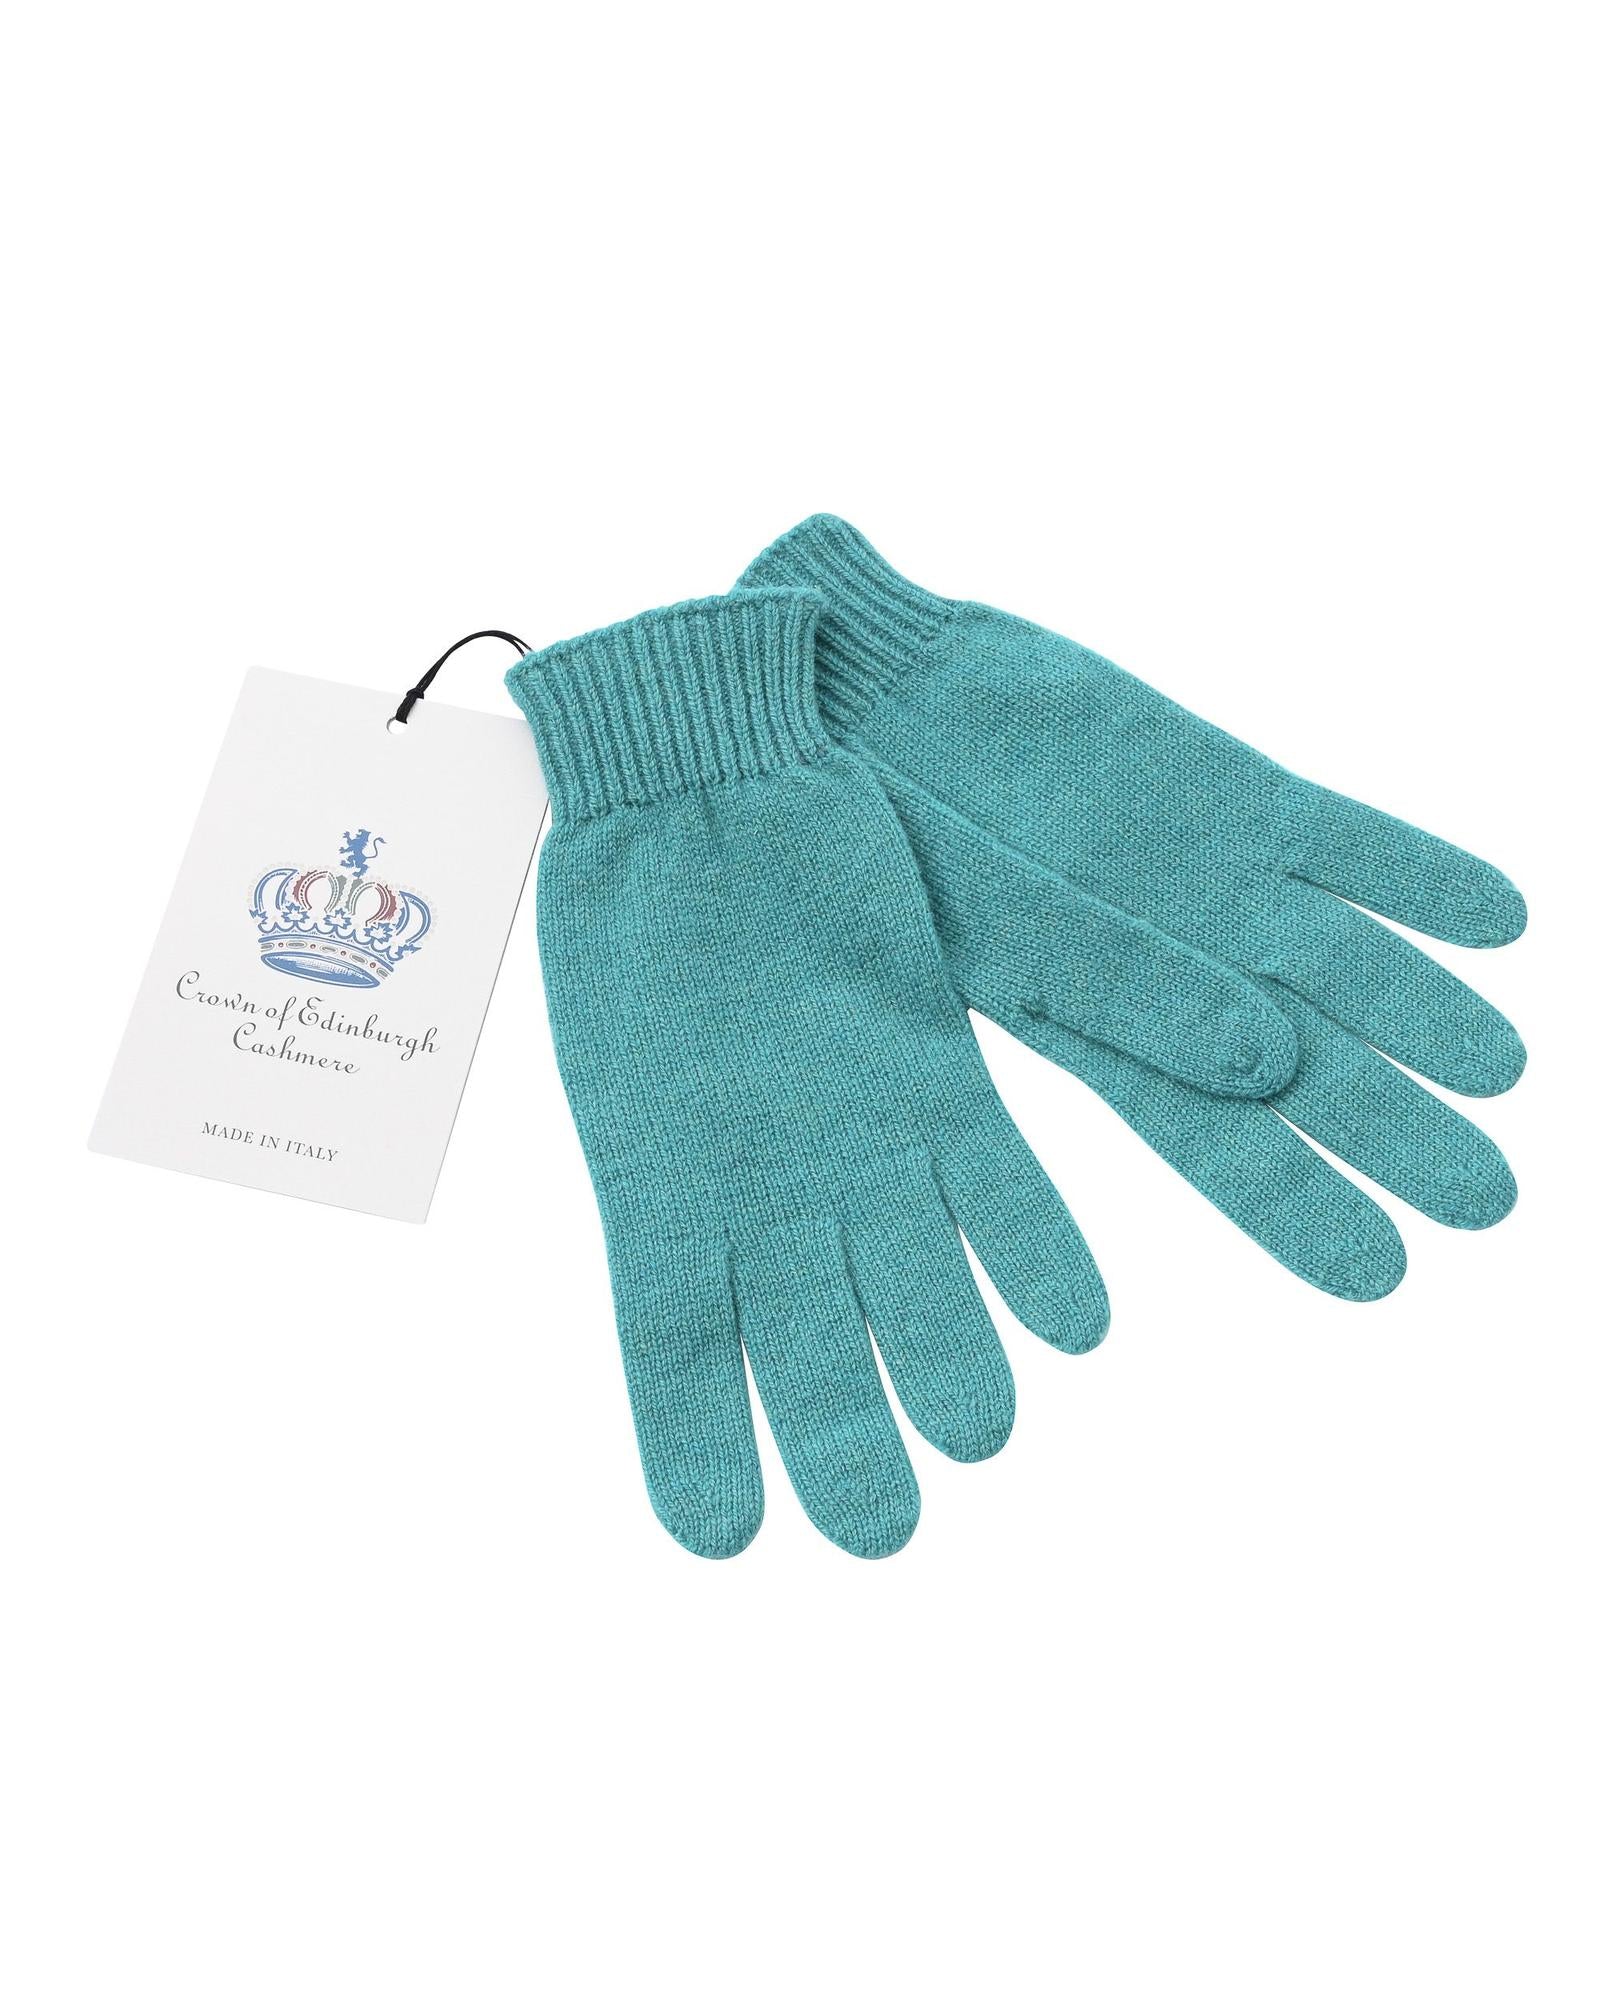 Women's Luxury Cashmere Womens Short Gloves in Turquoise - M